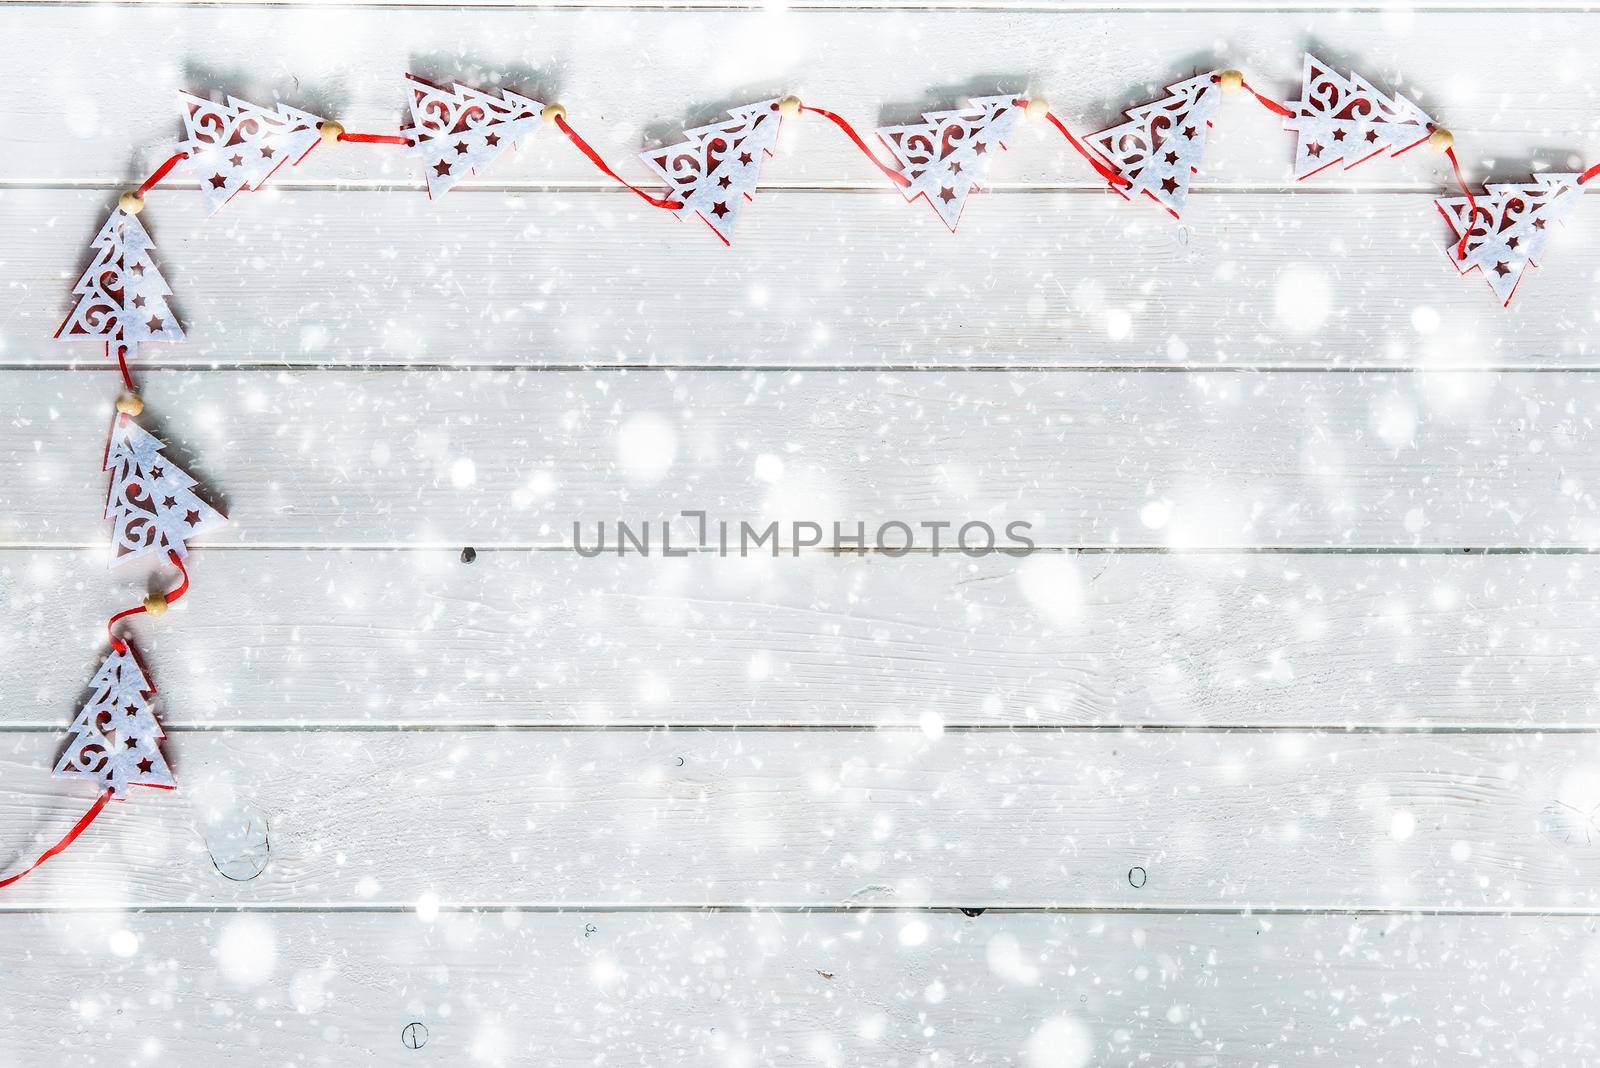 wooden planks under snow with decorations by tan4ikk1